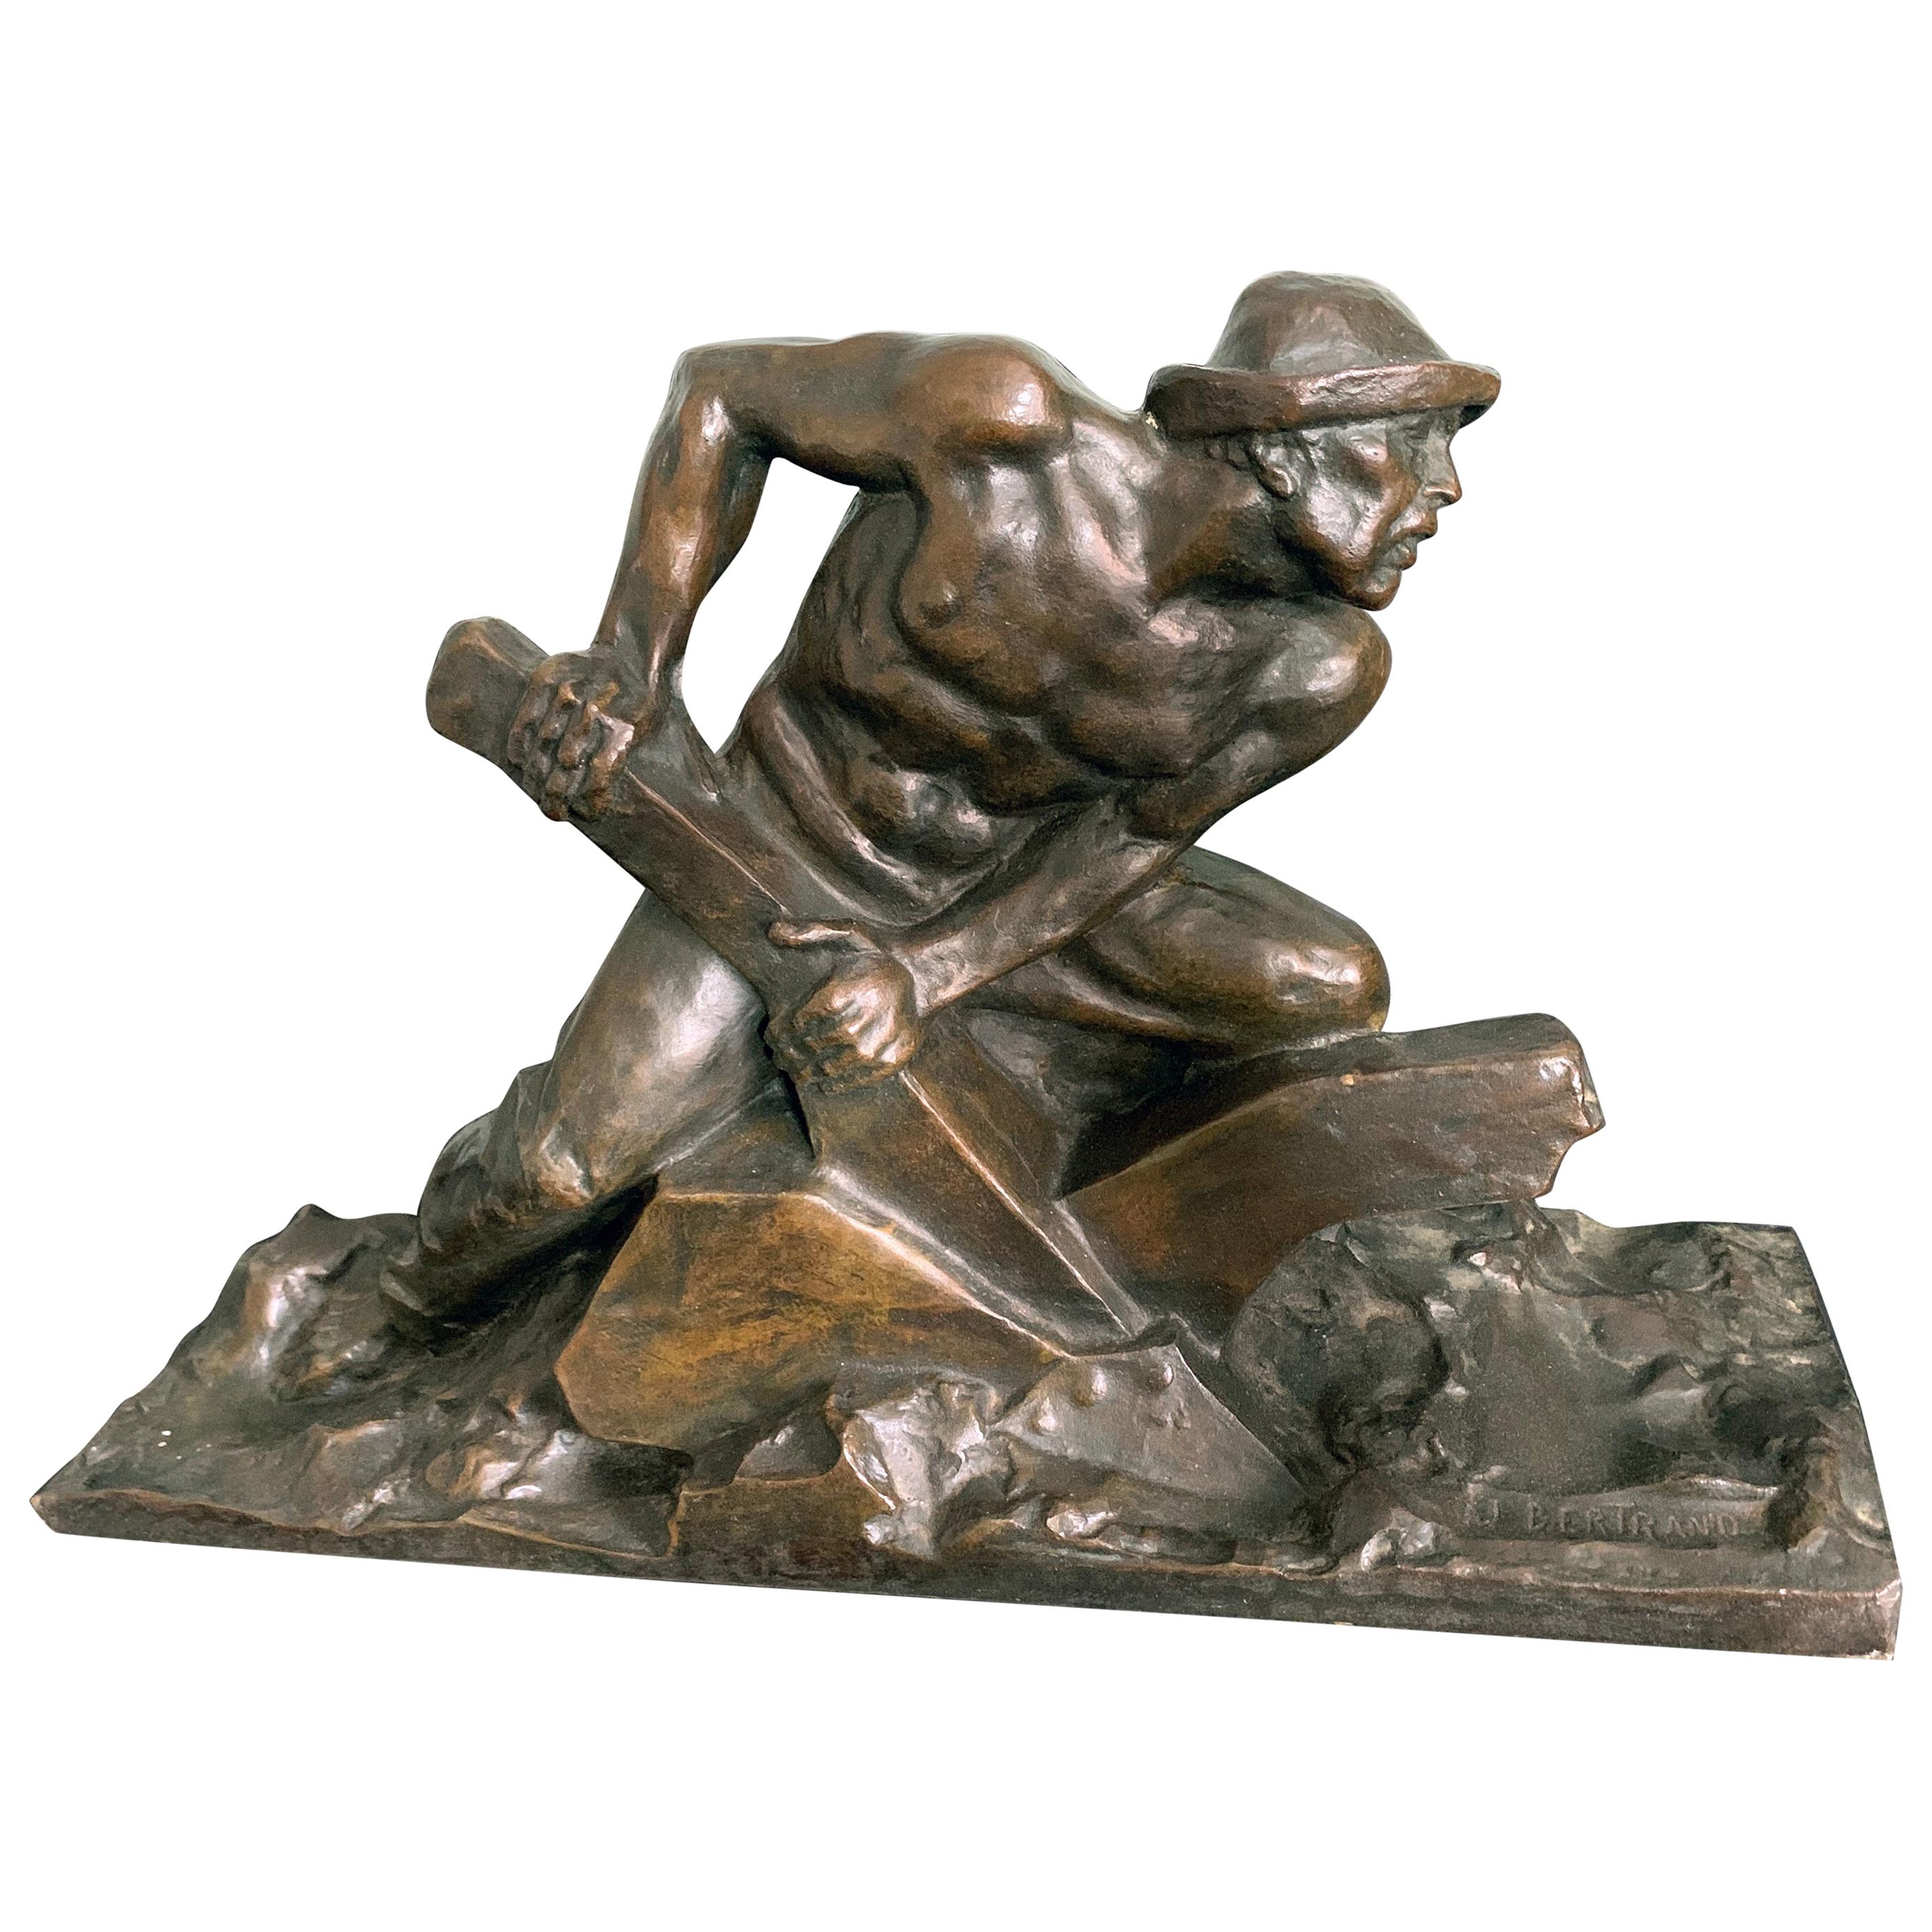 "Driving the Plow, " Large, Powerful Bronze Sculpture with Half-Nude Male Figure